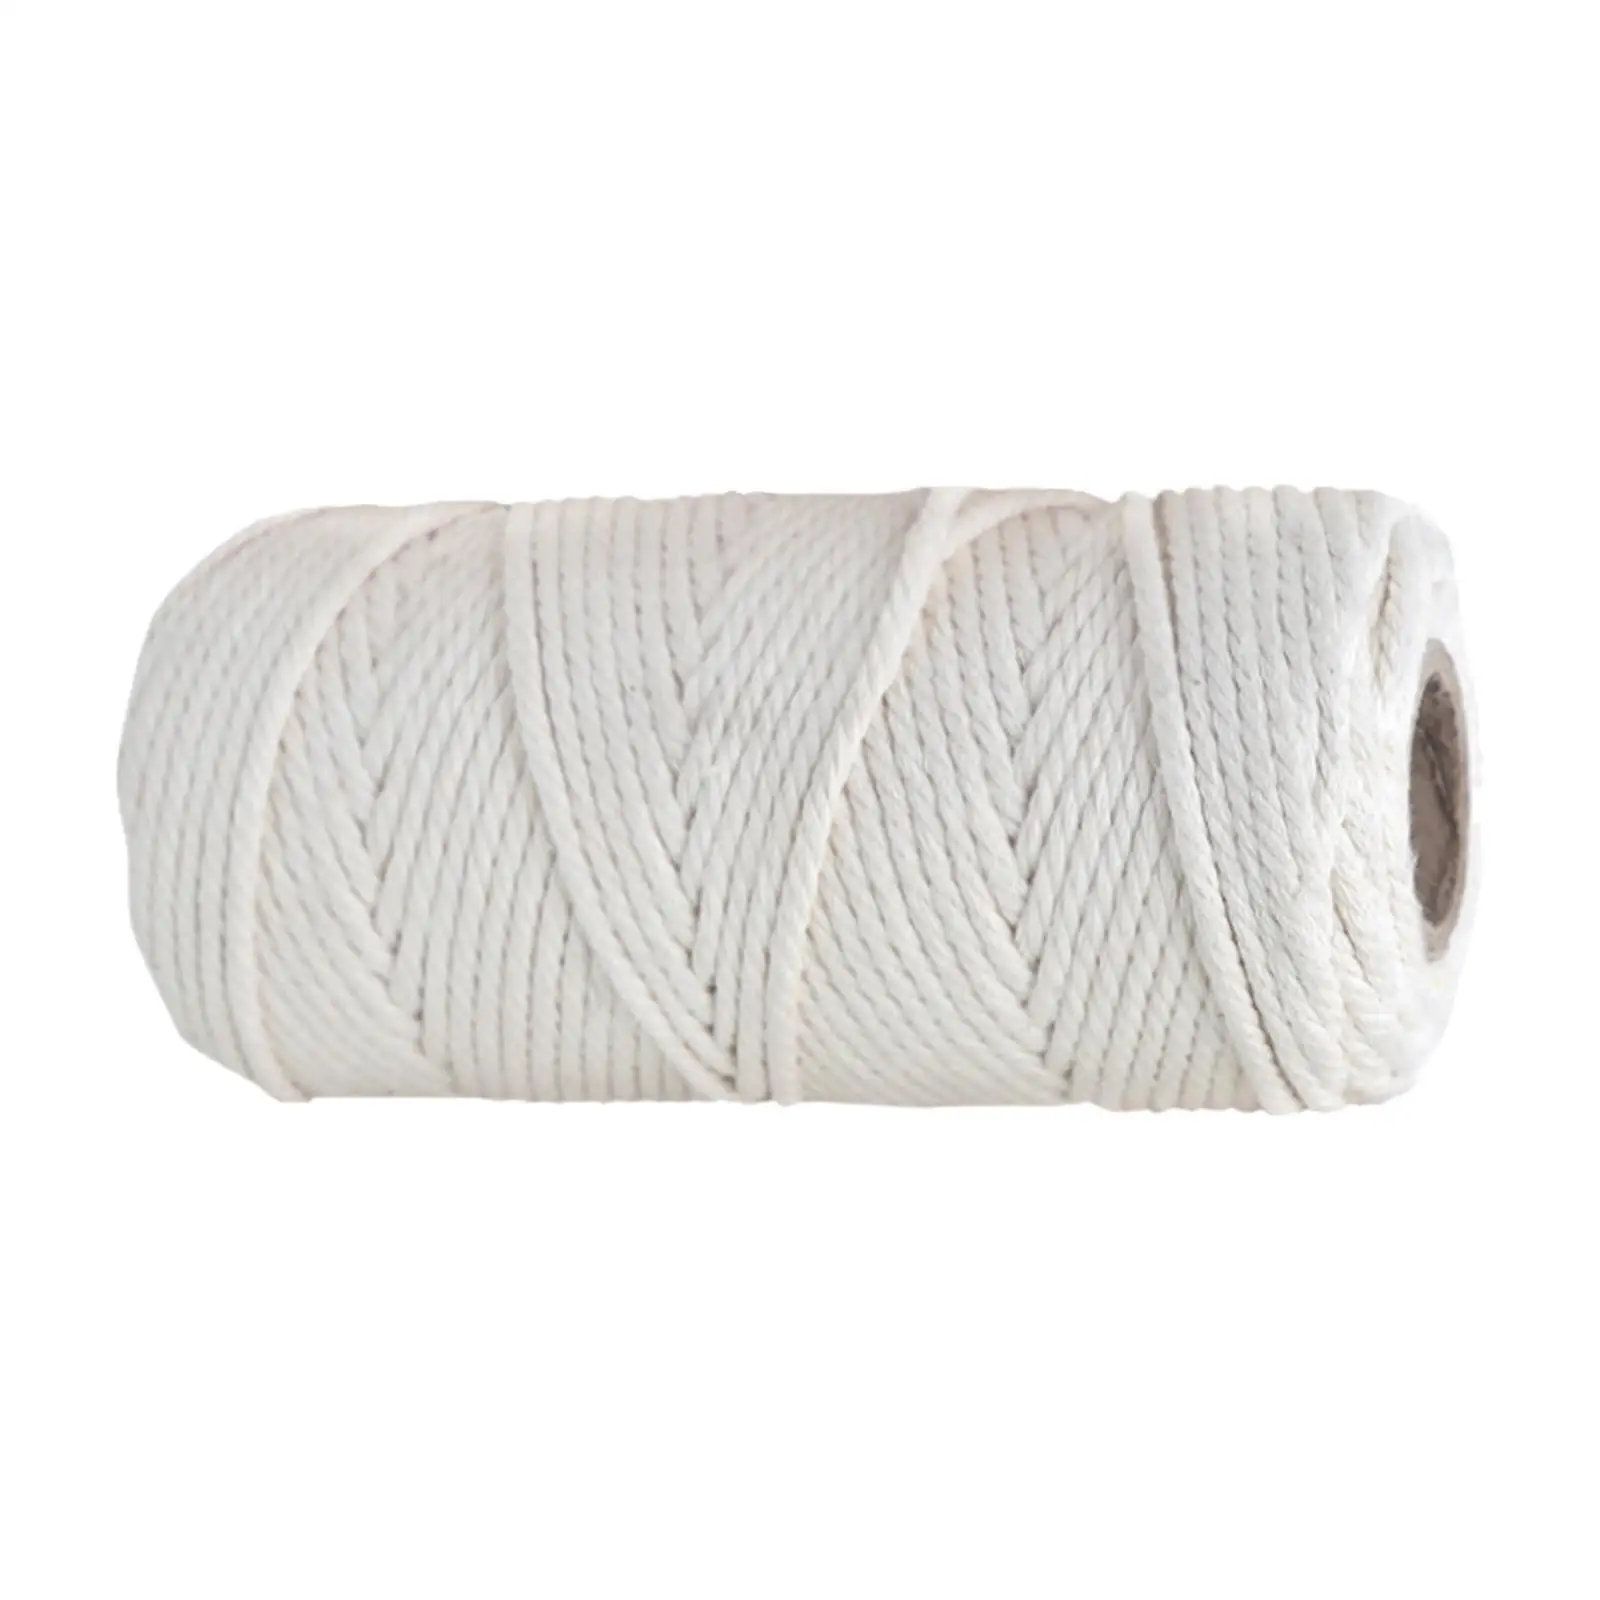 Butchers Twine String Multipurpose Photo Strings 3 Strand Twisted Cord Kitchen Twine String for Making Roasts Chicken Sausages